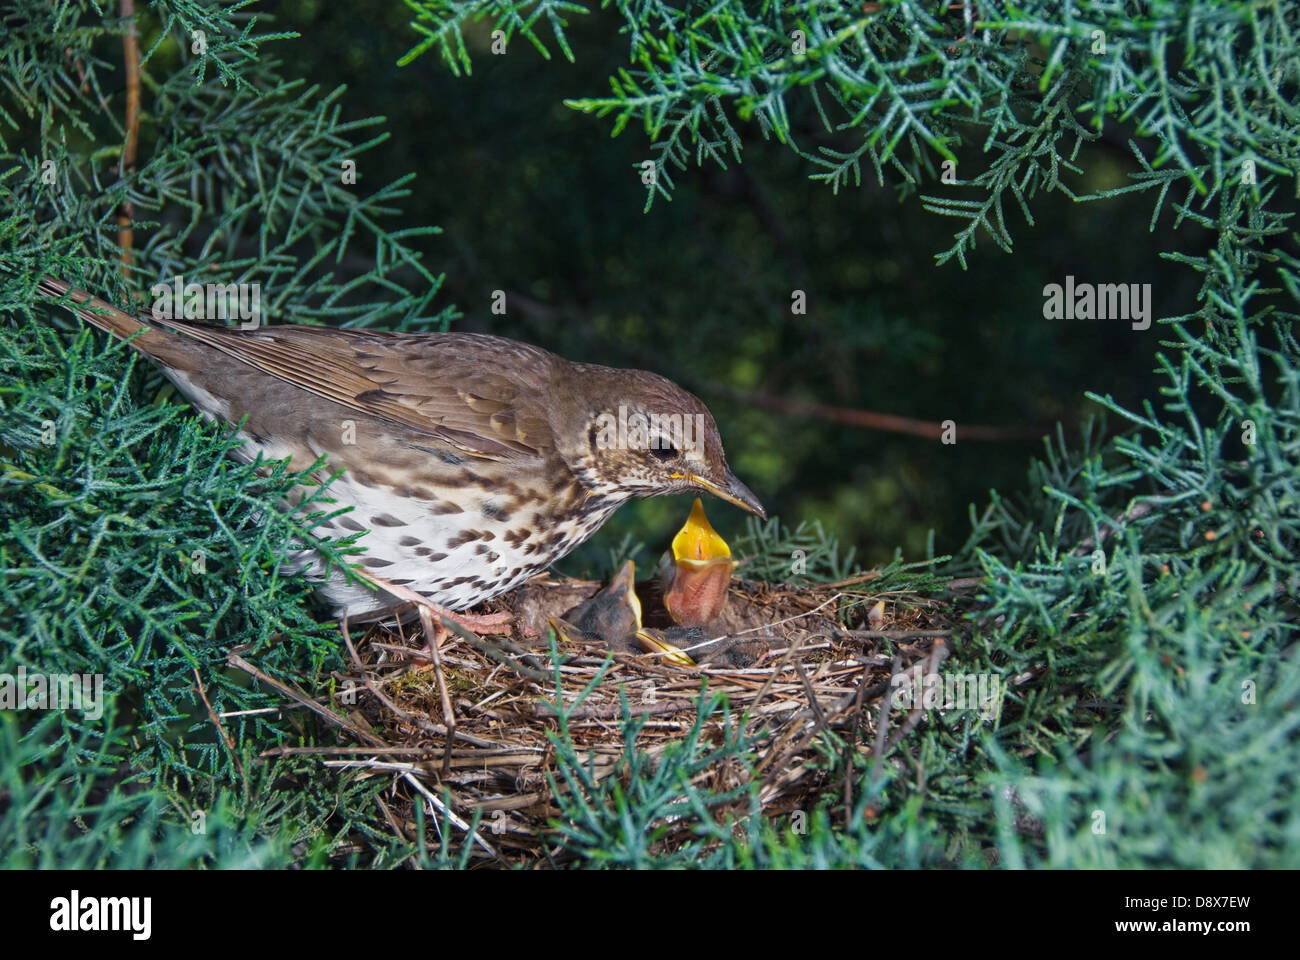 A song thrush (Turdus philomelos) at nest with chicks Stock Photo